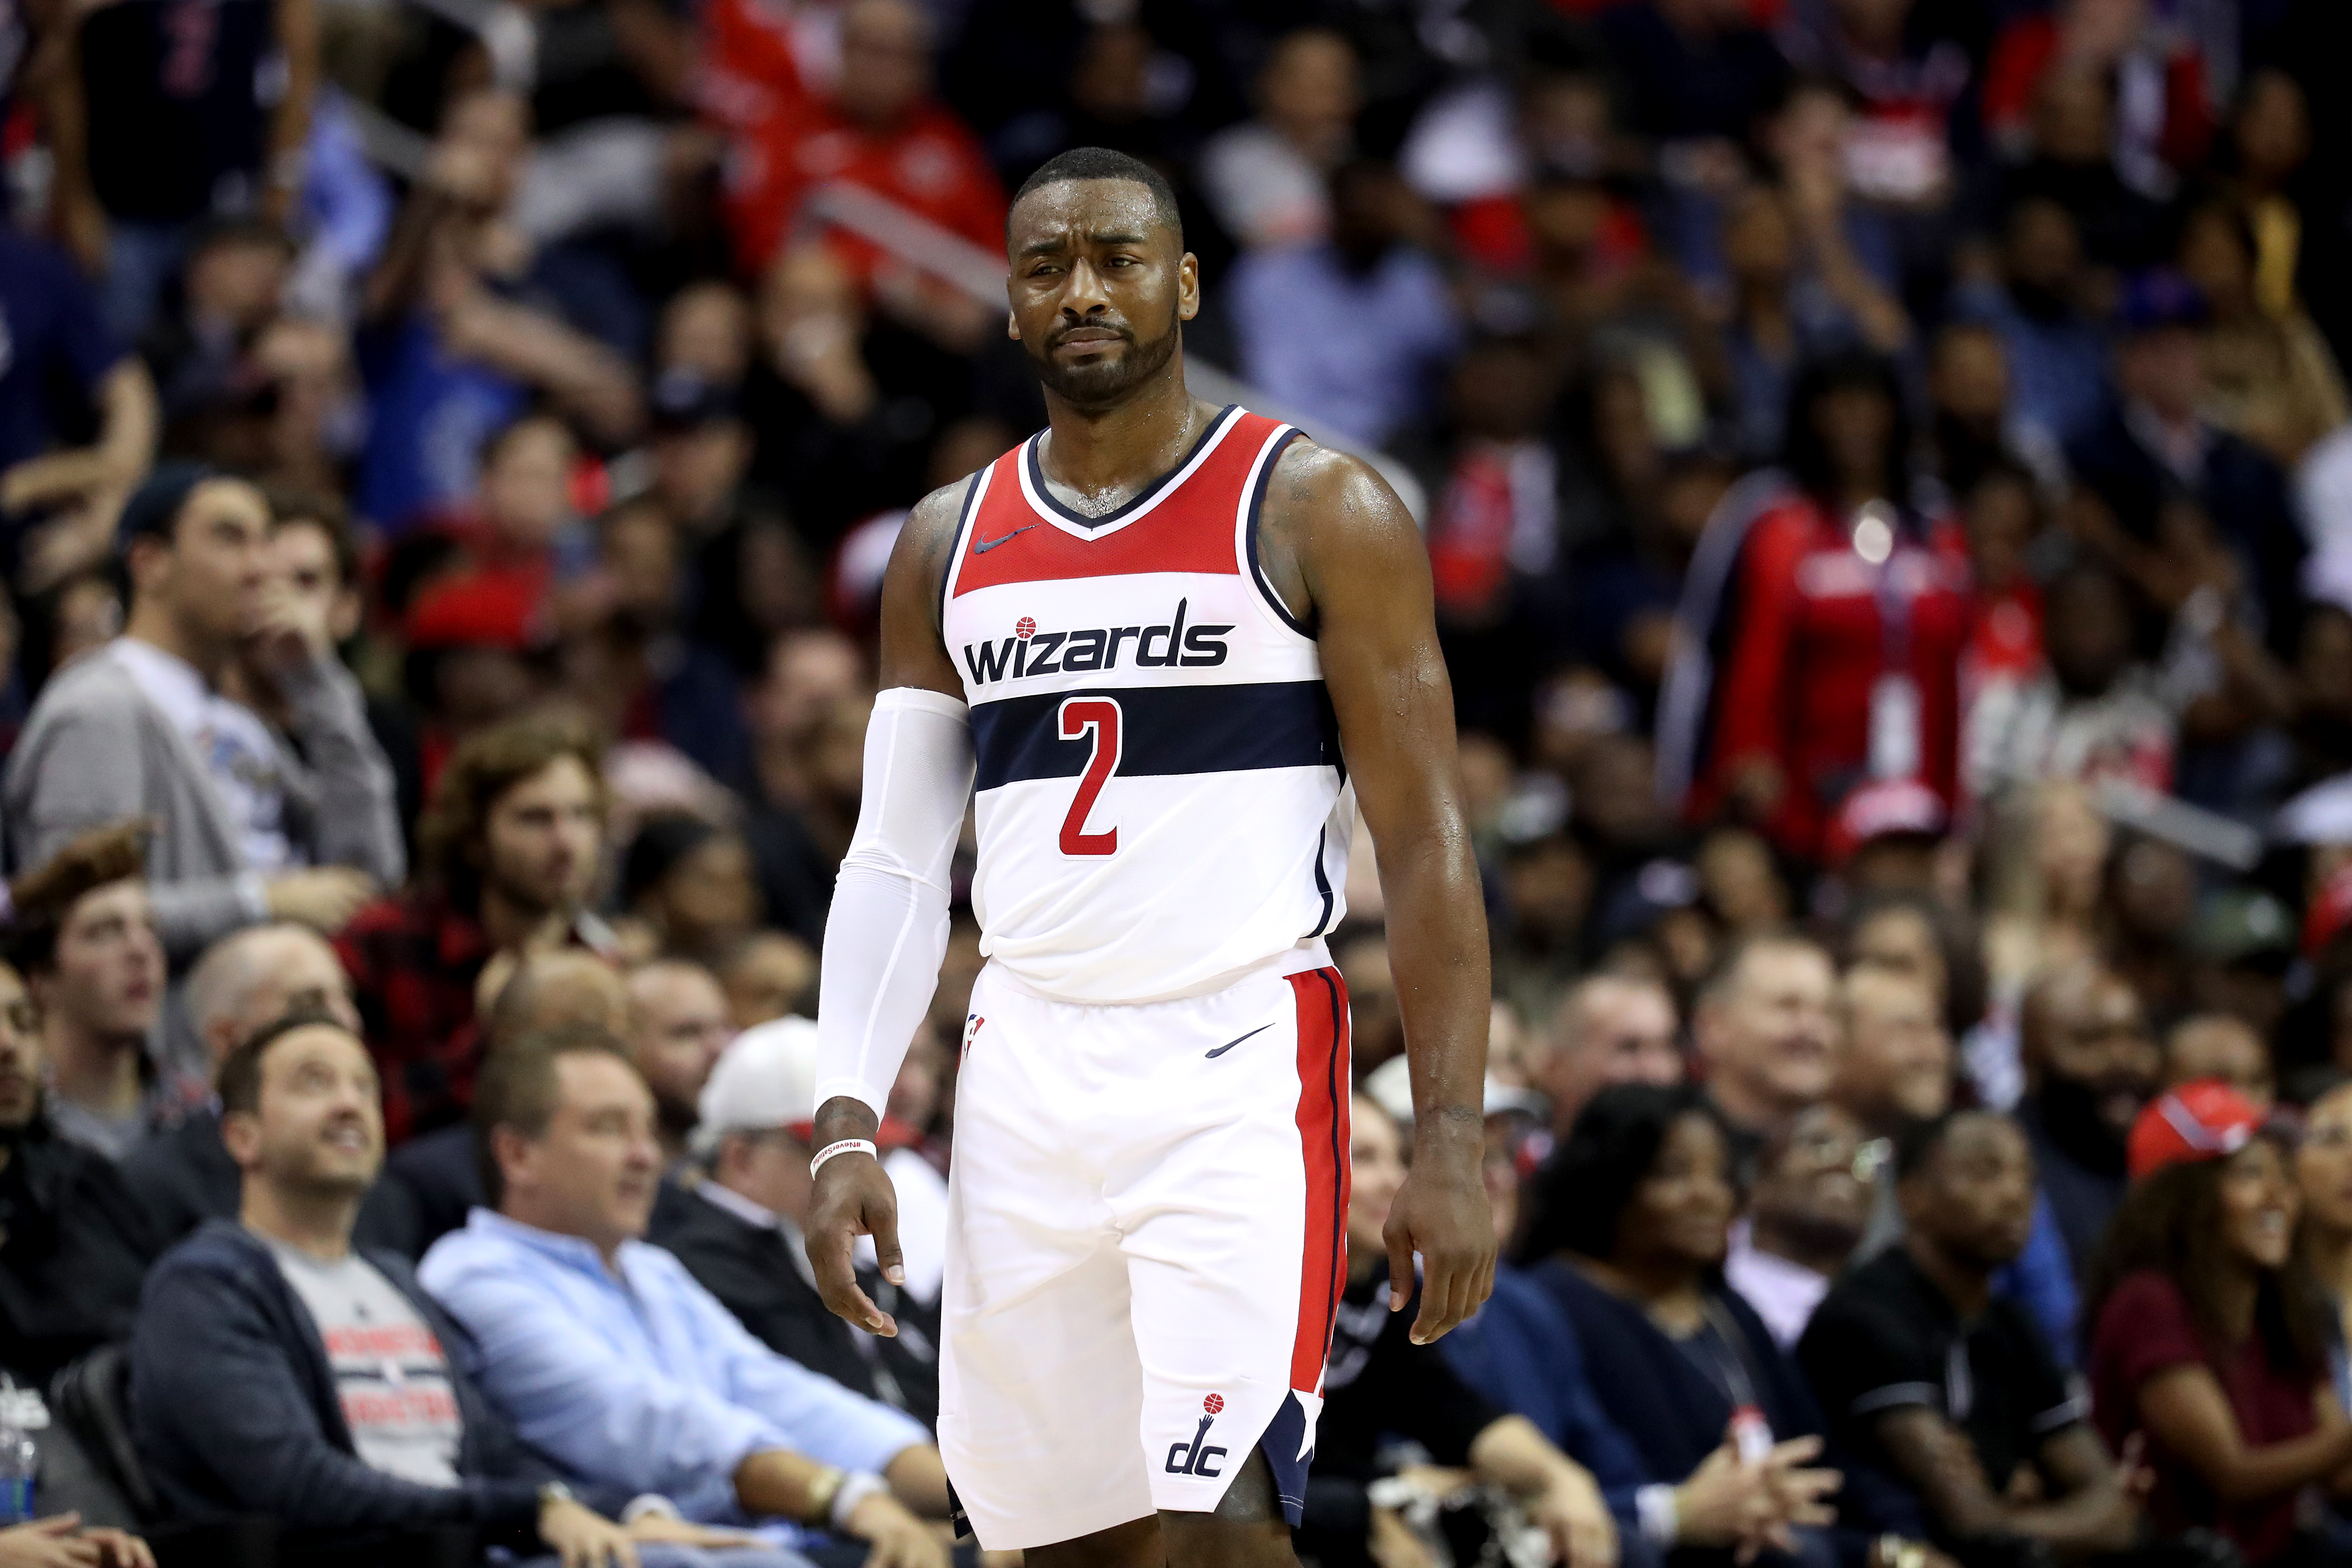 John Wall Returns to D.C. with the Clippers, Fans Show Love - The